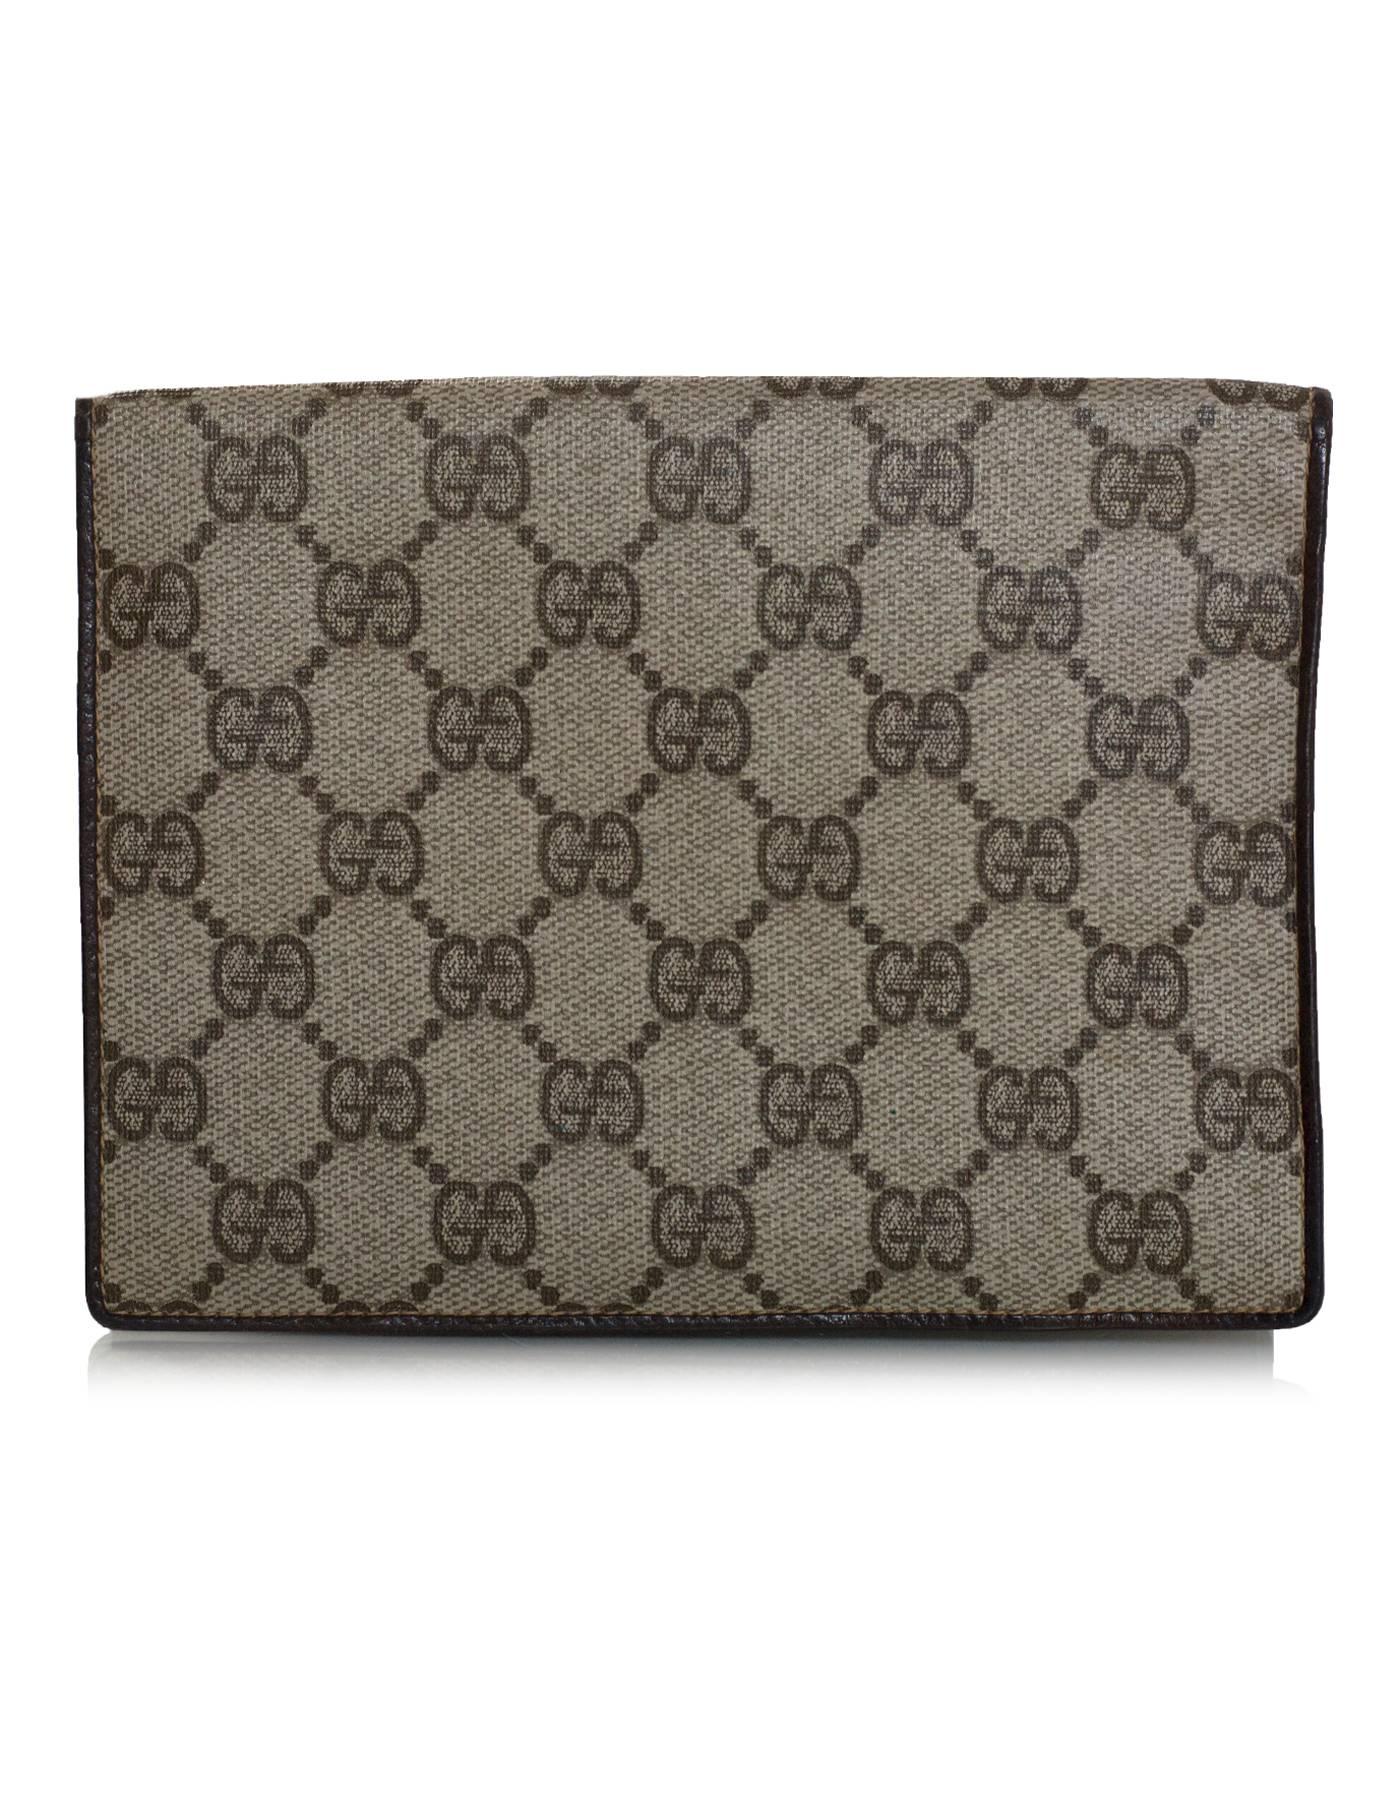 Gucci Vintage Tan Monogram Supreme Passport Cover
Can also be used as a wallet and features three zip pockets at back

Made In: Italy
Color: Tan, brown
Materials: Coated canvas, leather
Lining: Brown leather
Closure/Opening: Bi-fold
Exterior